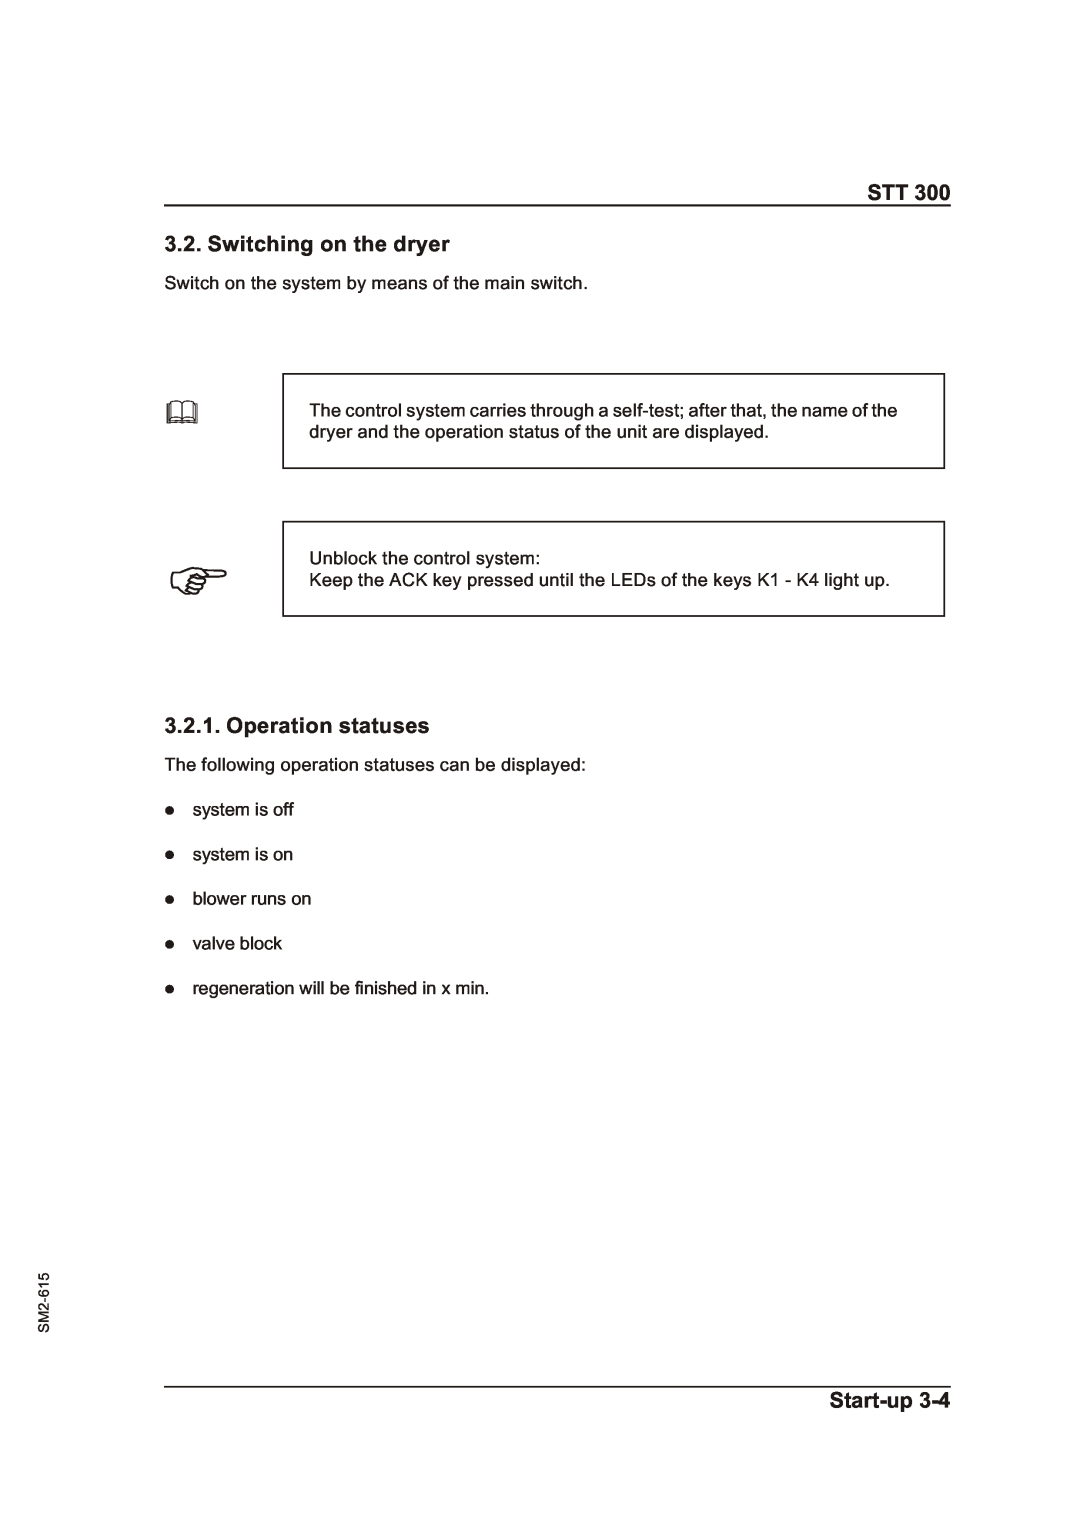 Sterling STT 300 operating instructions STT 3.2. Switching on the dryer, Operation statuses, Start-up 